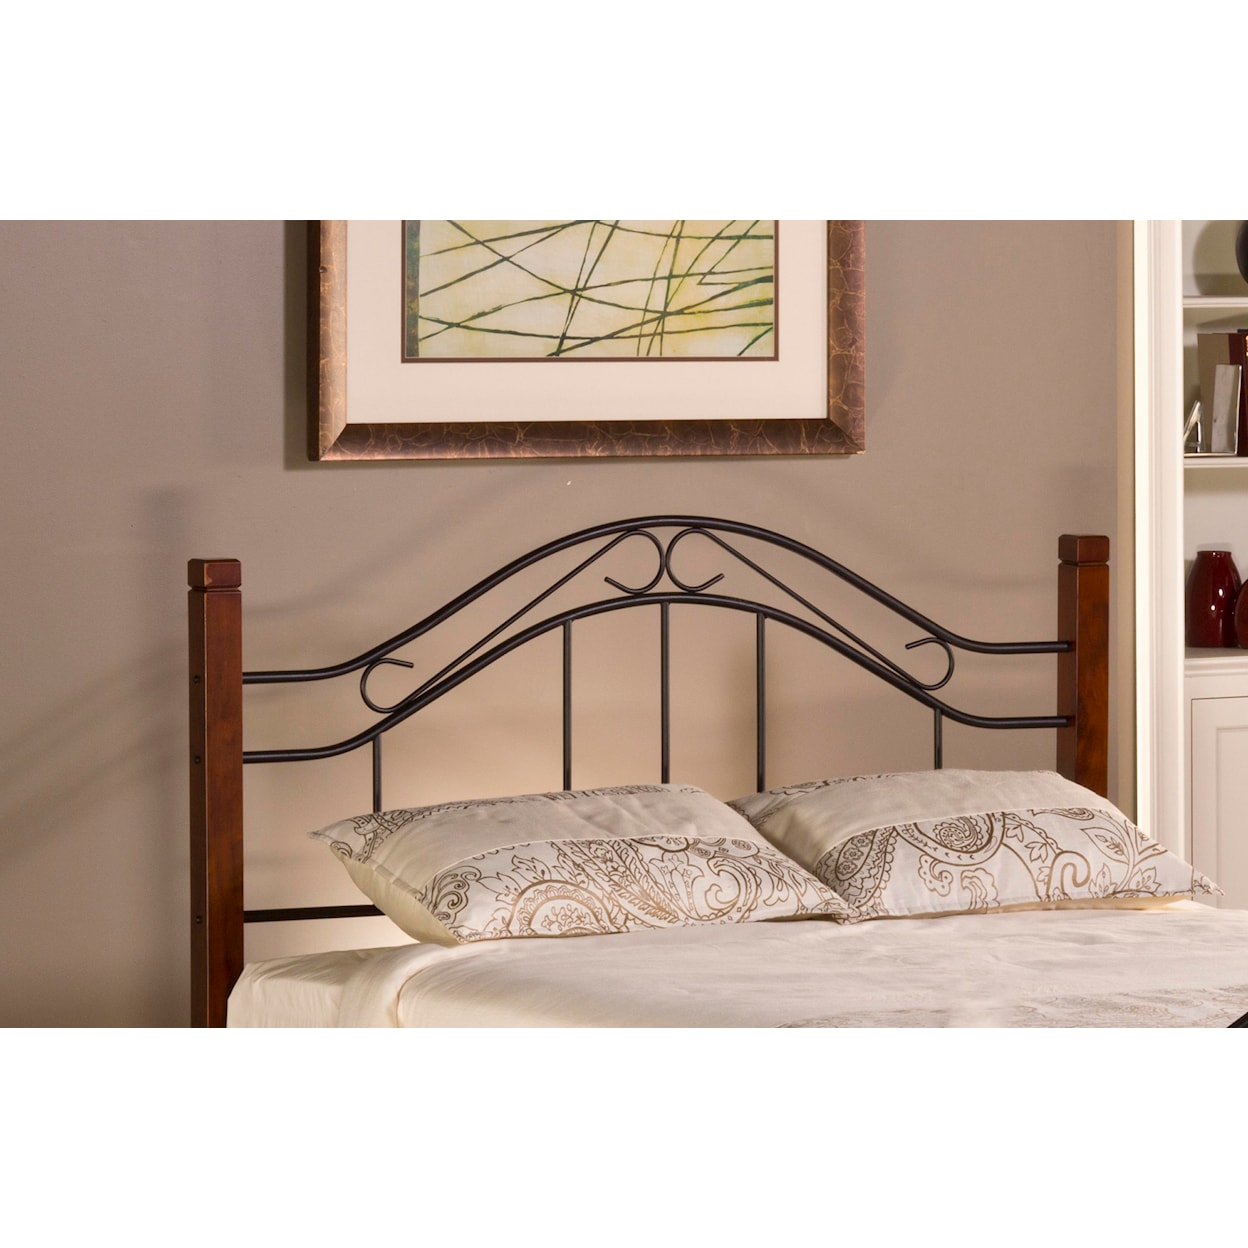 Hillsdale Metal Beds Matson King Headboard with Frame